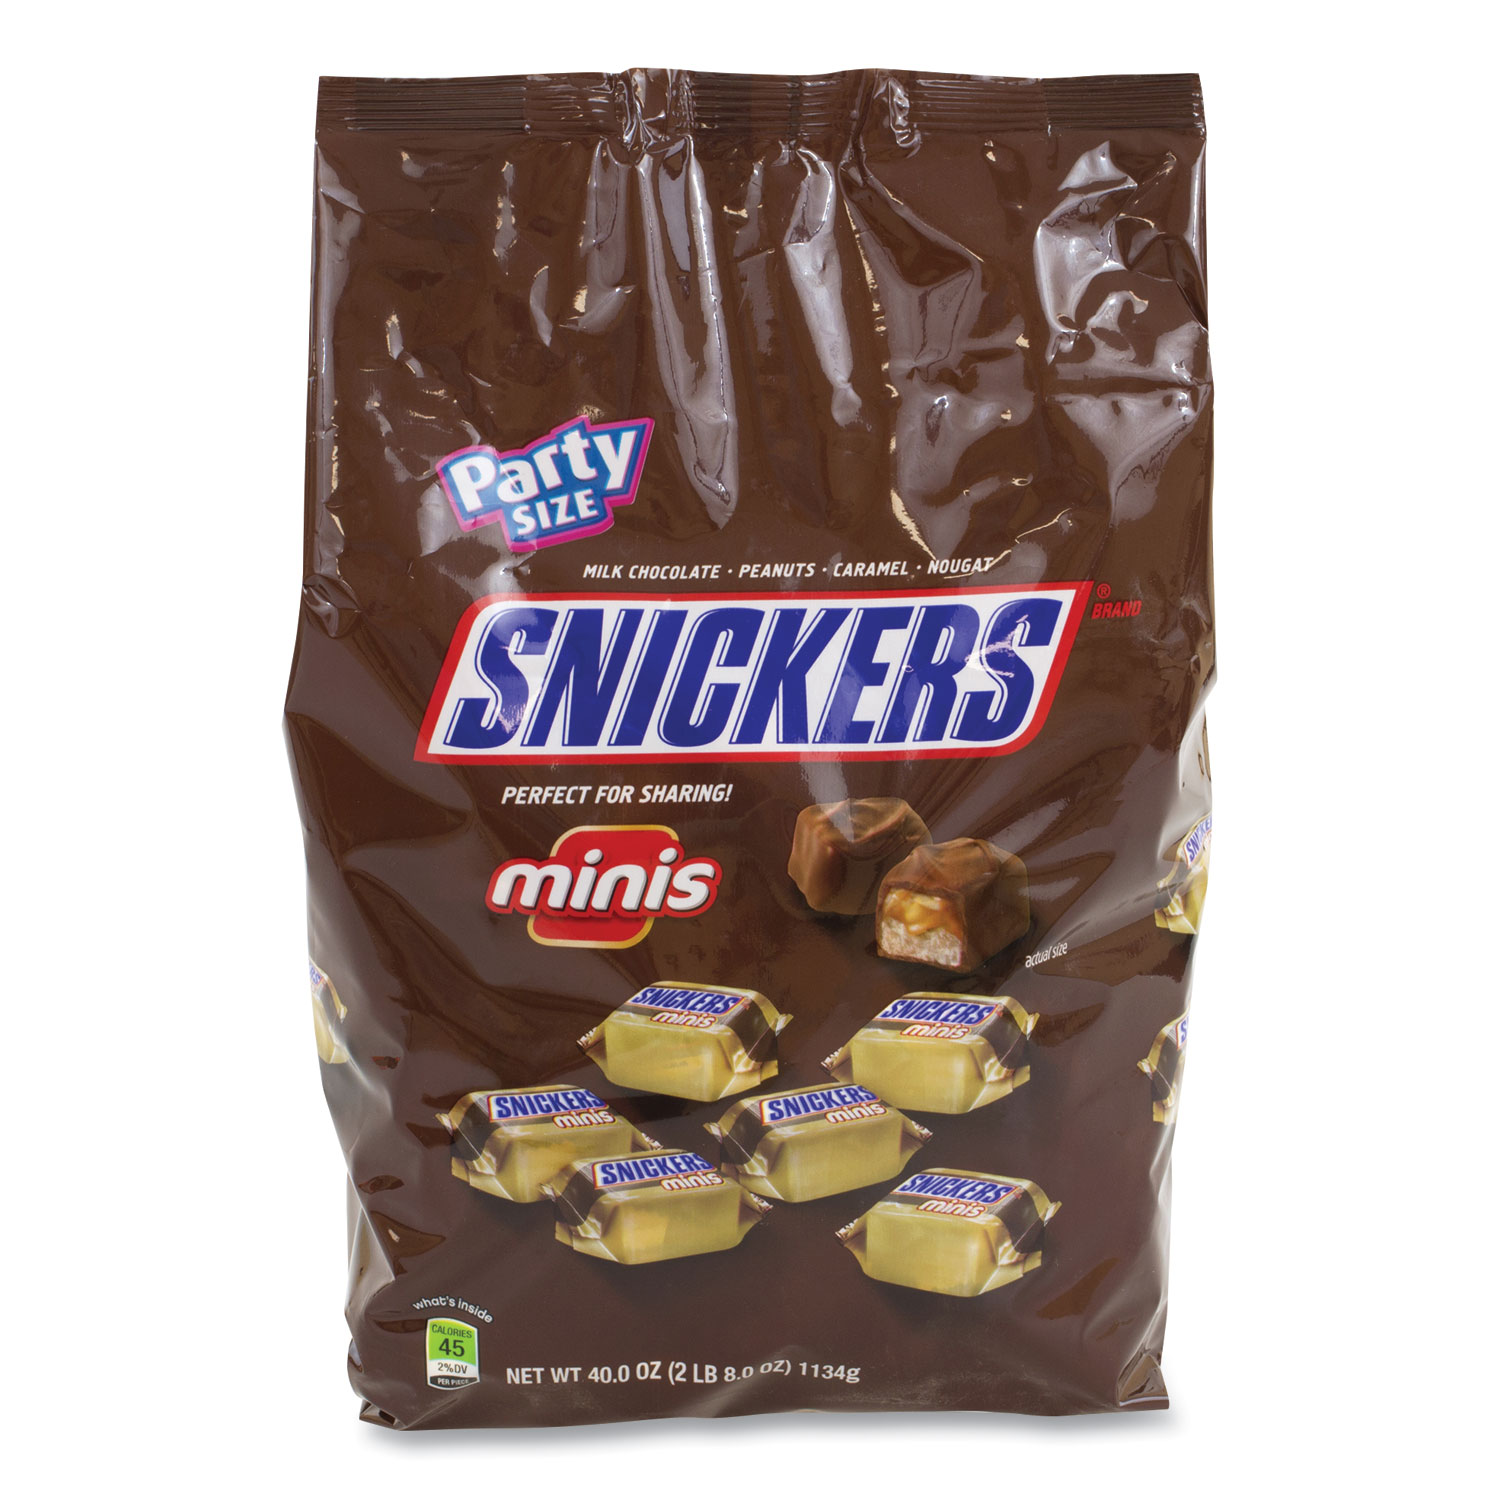  Snickers 551024 Minis Size Chocolate Bars, Milk Chocolate, 40 oz Bag, 2 Bags/Pack, Free Delivery in 1-4 Business Days (GRR20900412) 